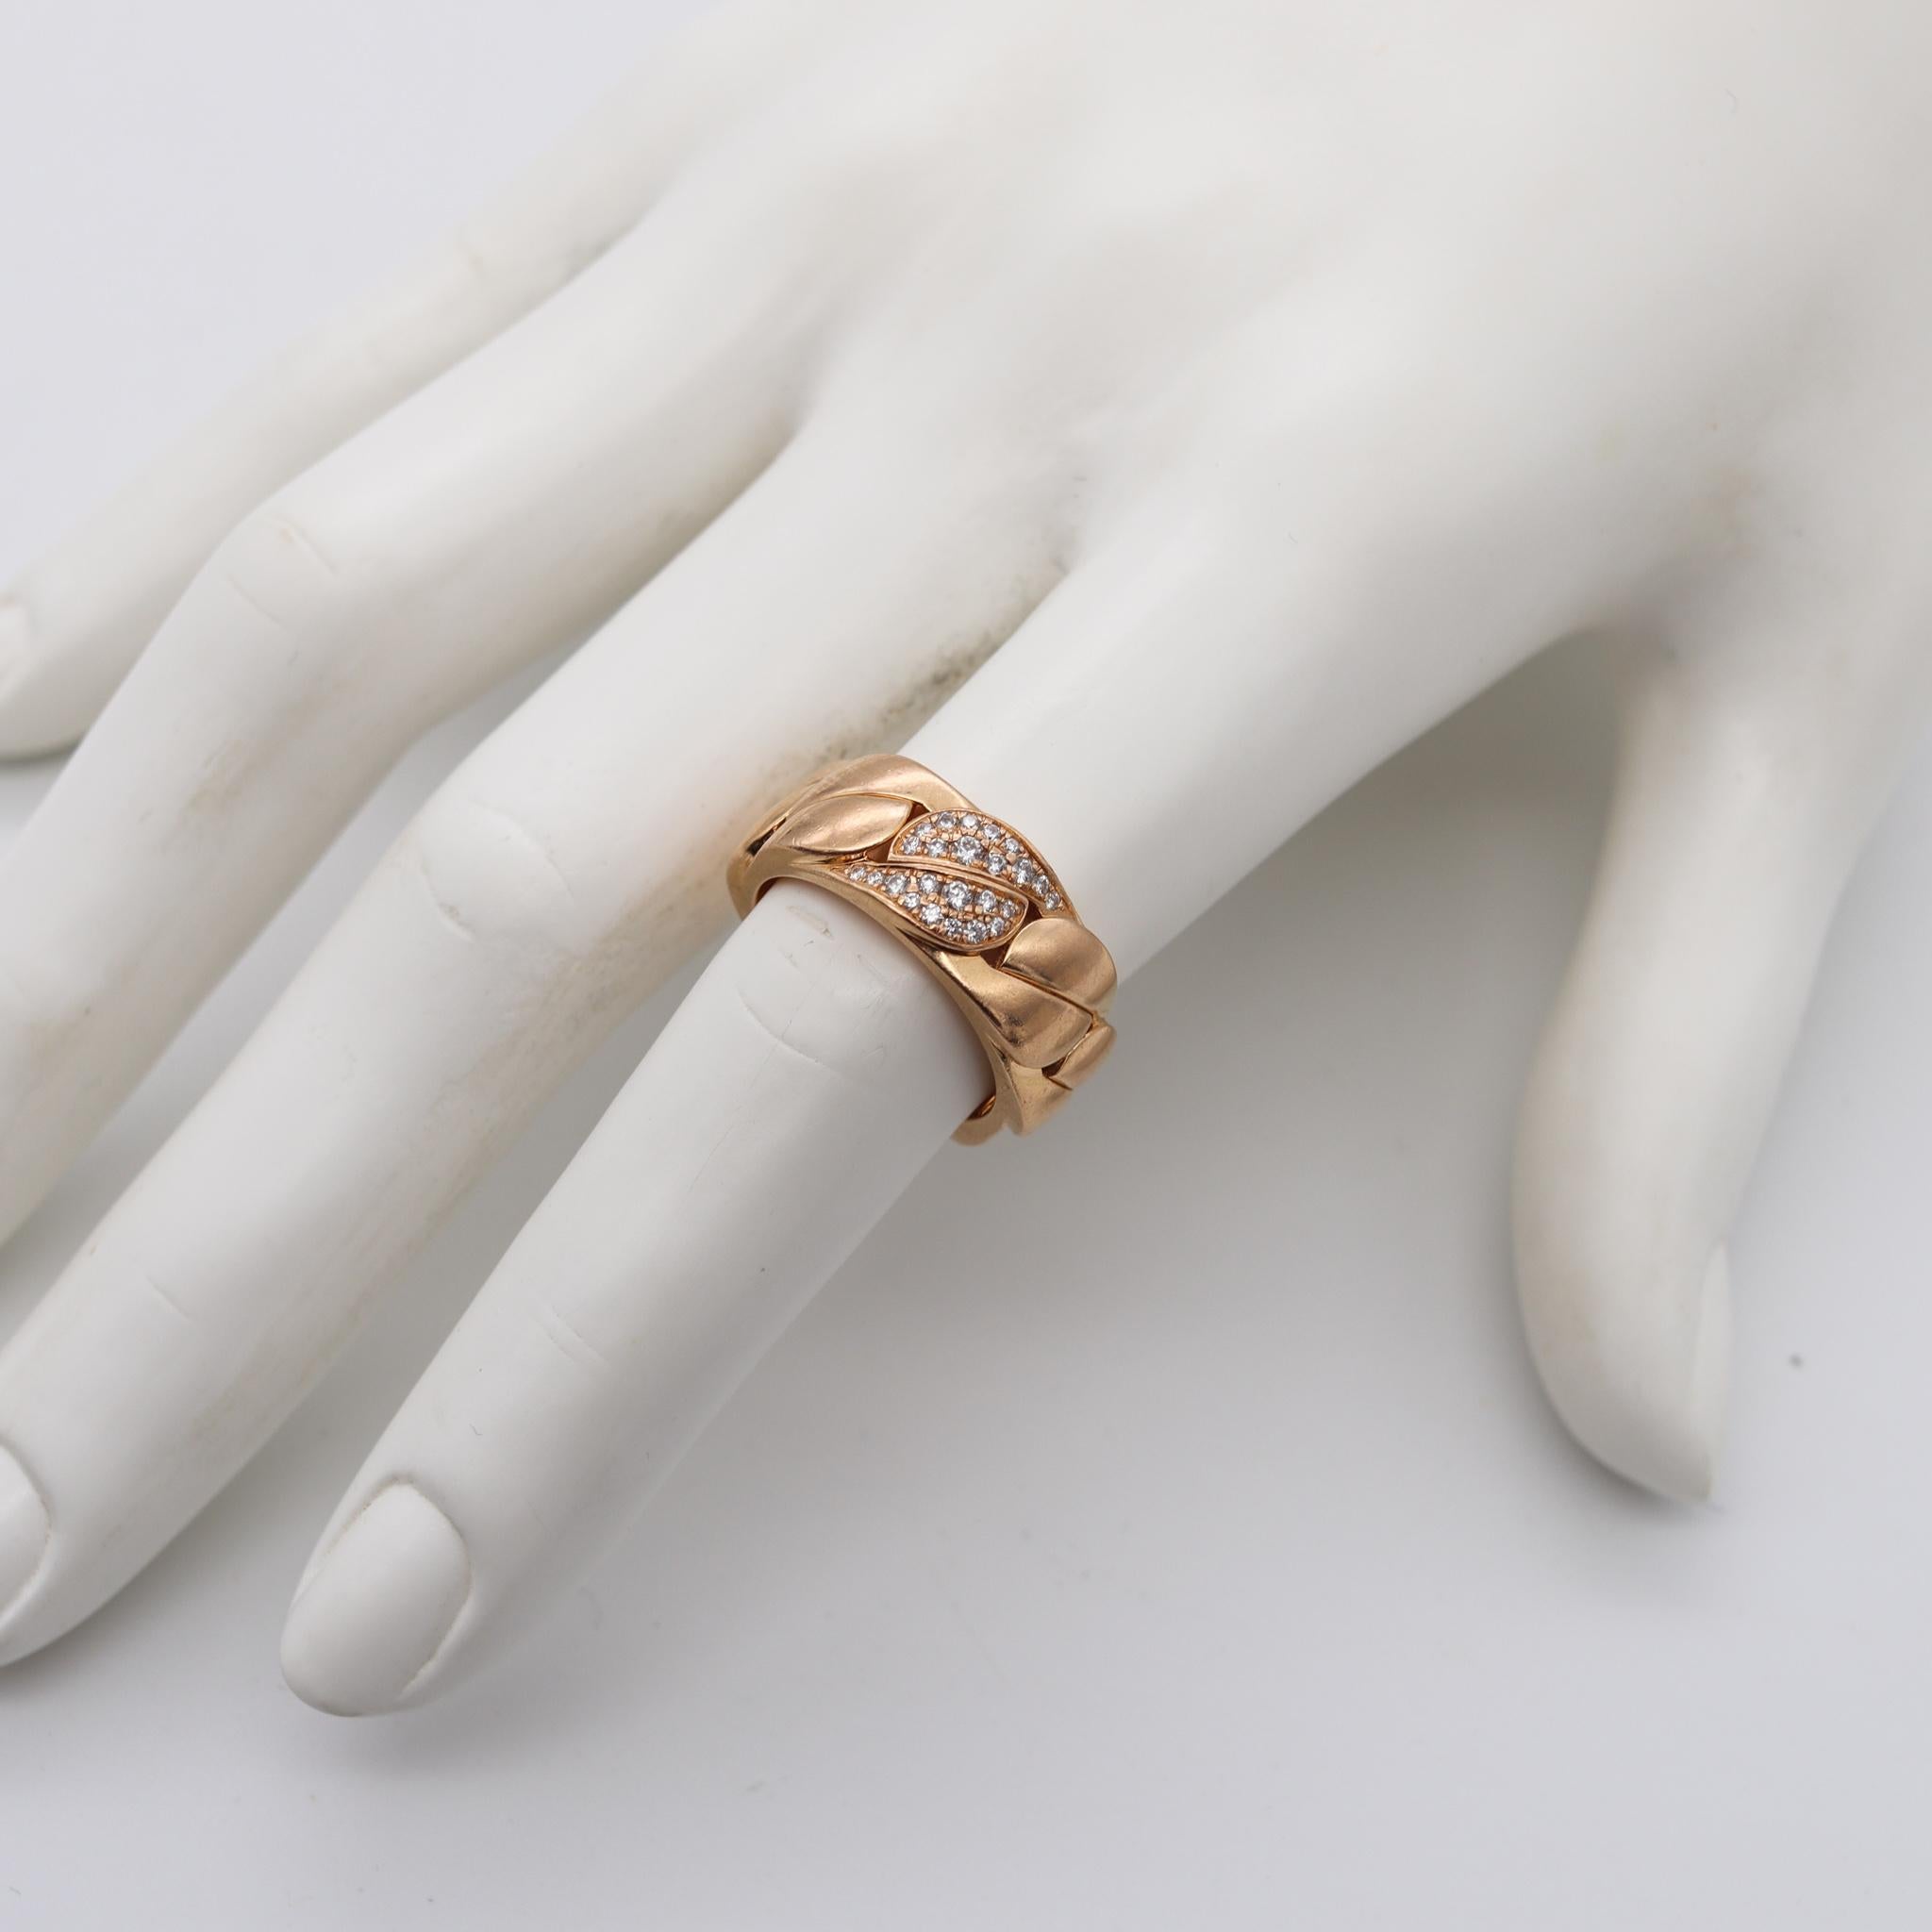 La Dona ring designed by Cartier.

A contemporary piece created in Paris France by the house of Cartier. This iconic ring is part of the La Dona collection and was crafted in solid yellow gold of 18 karats, with high polished finish.

Pave set on